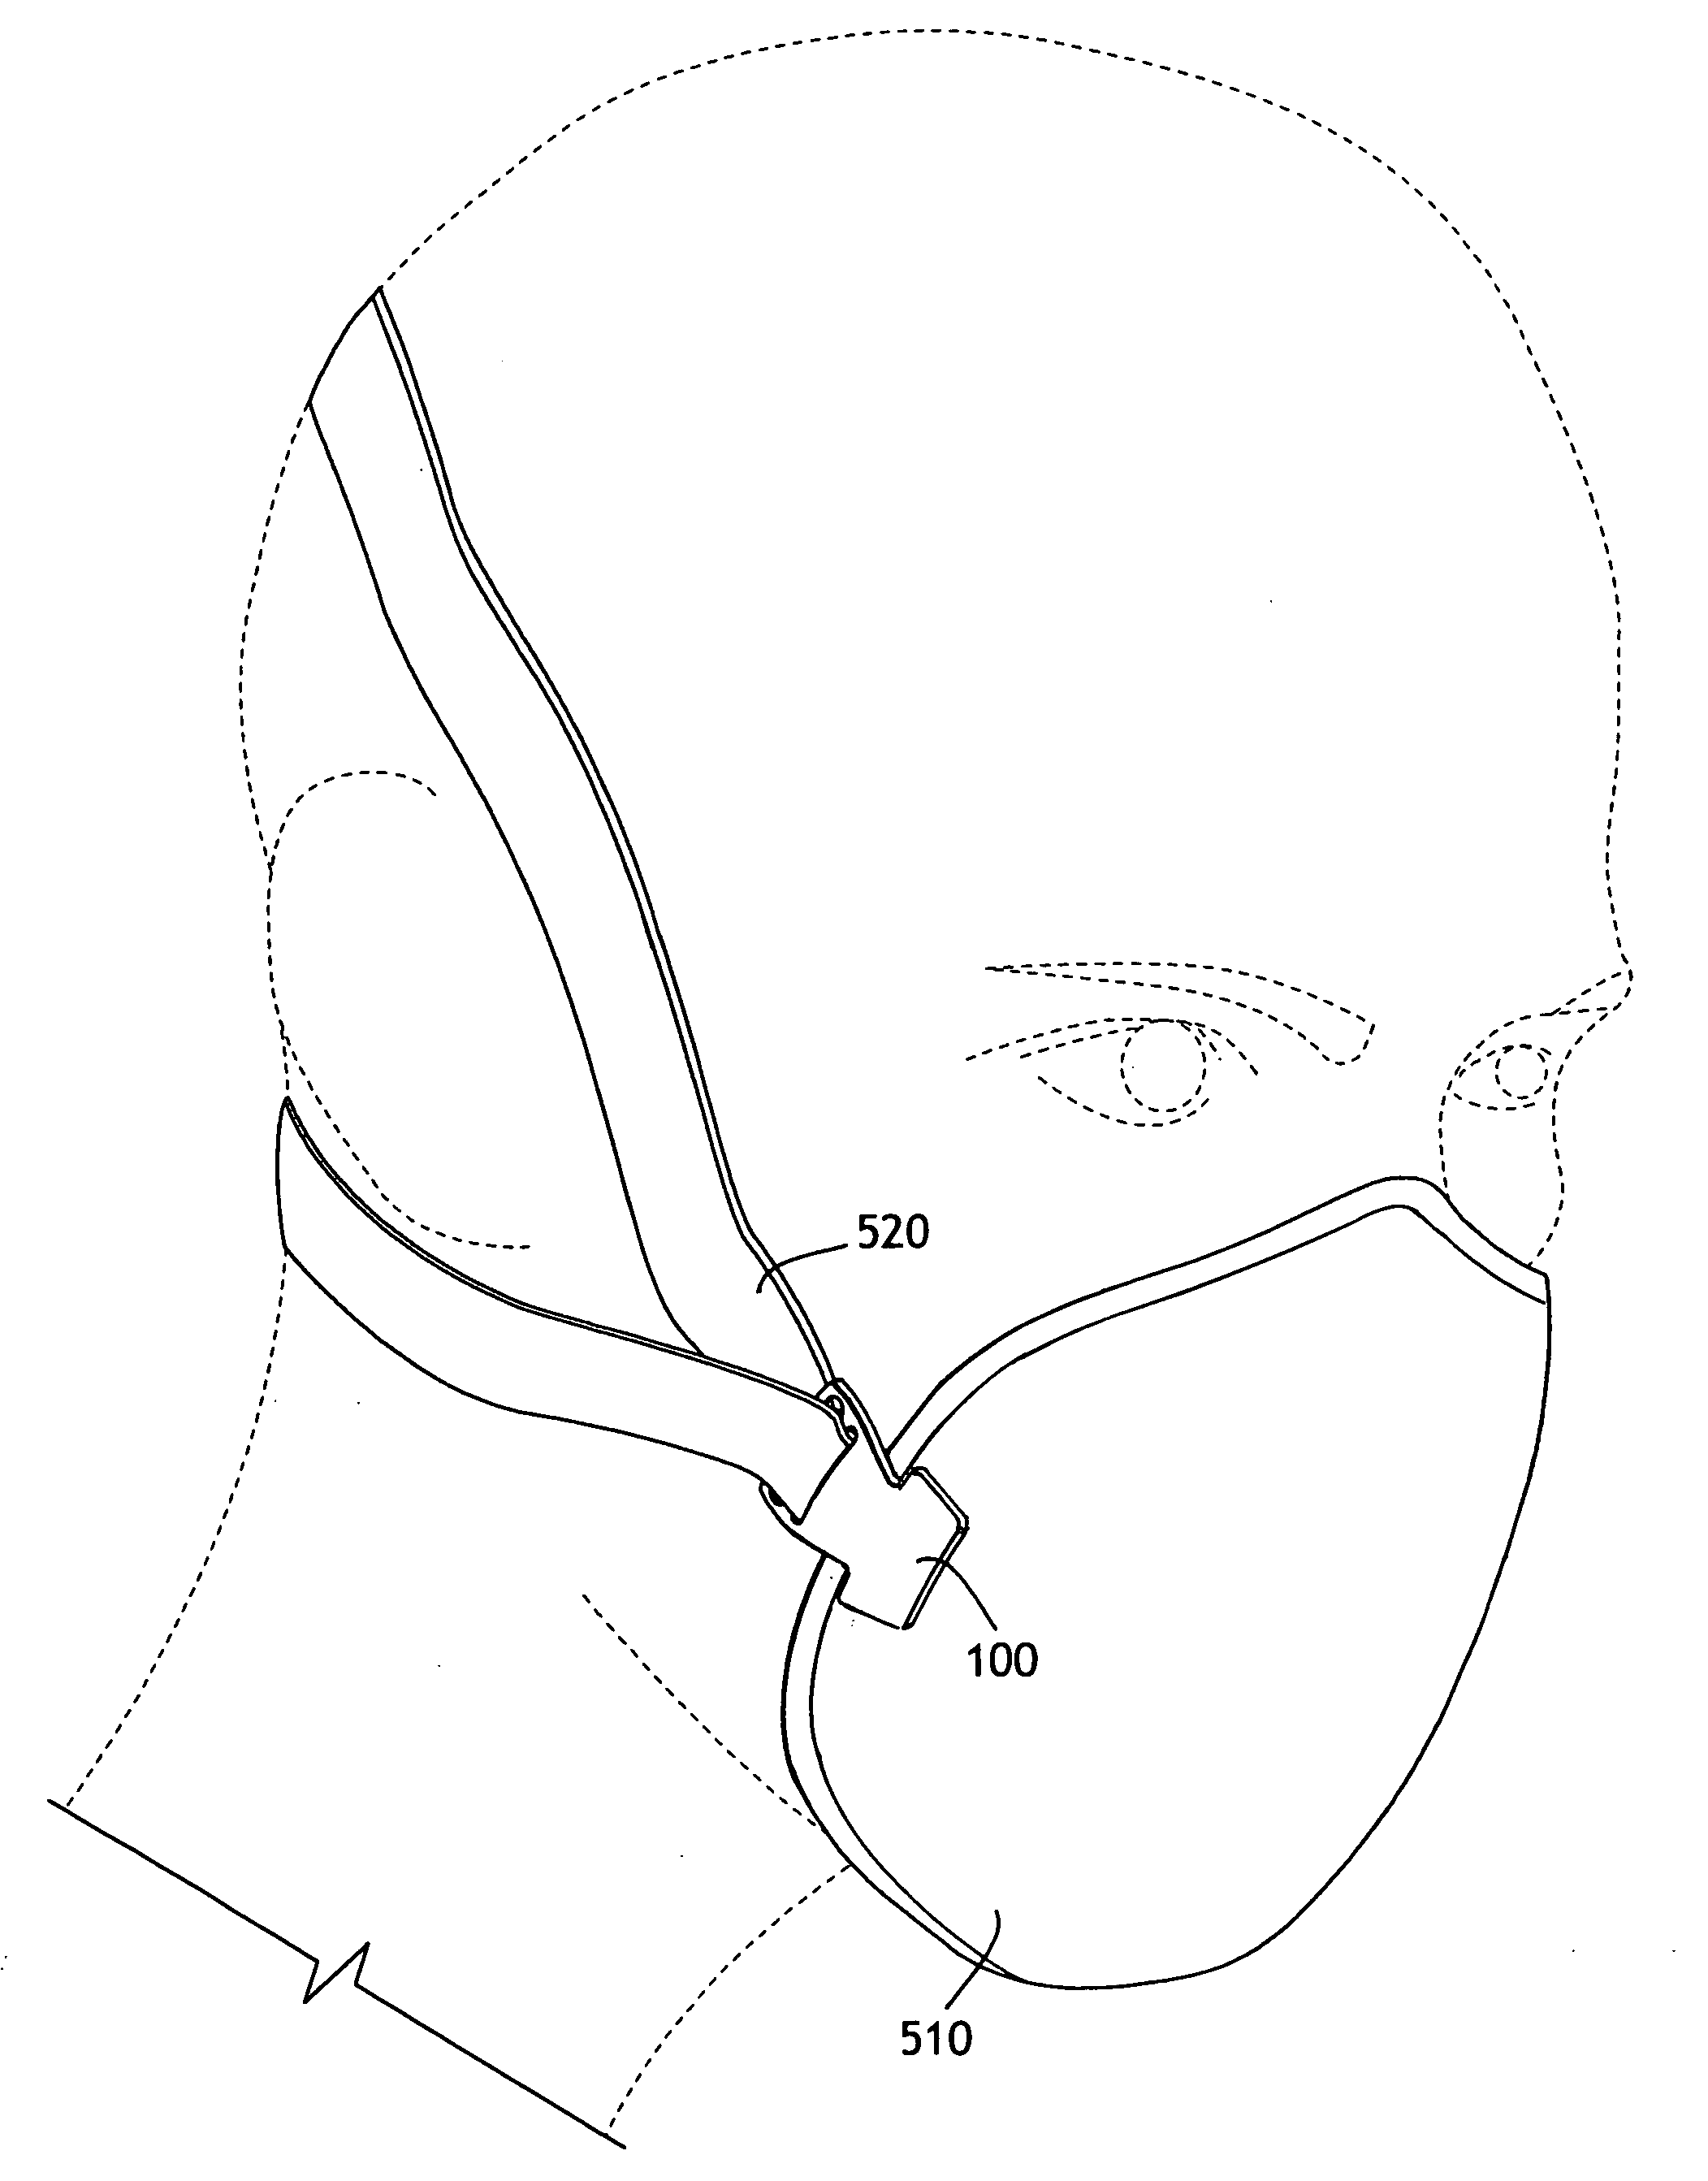 Strap fastening system for a disposable respirator providing improved donning